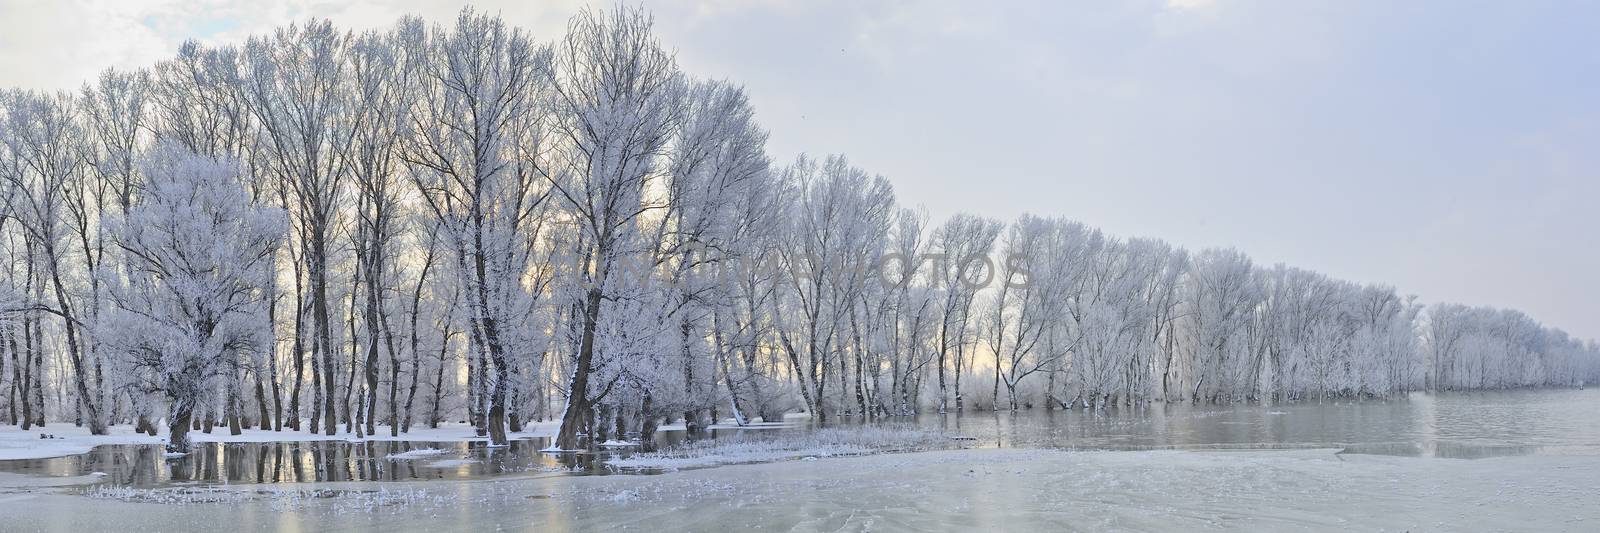 Frosty winter trees by mady70